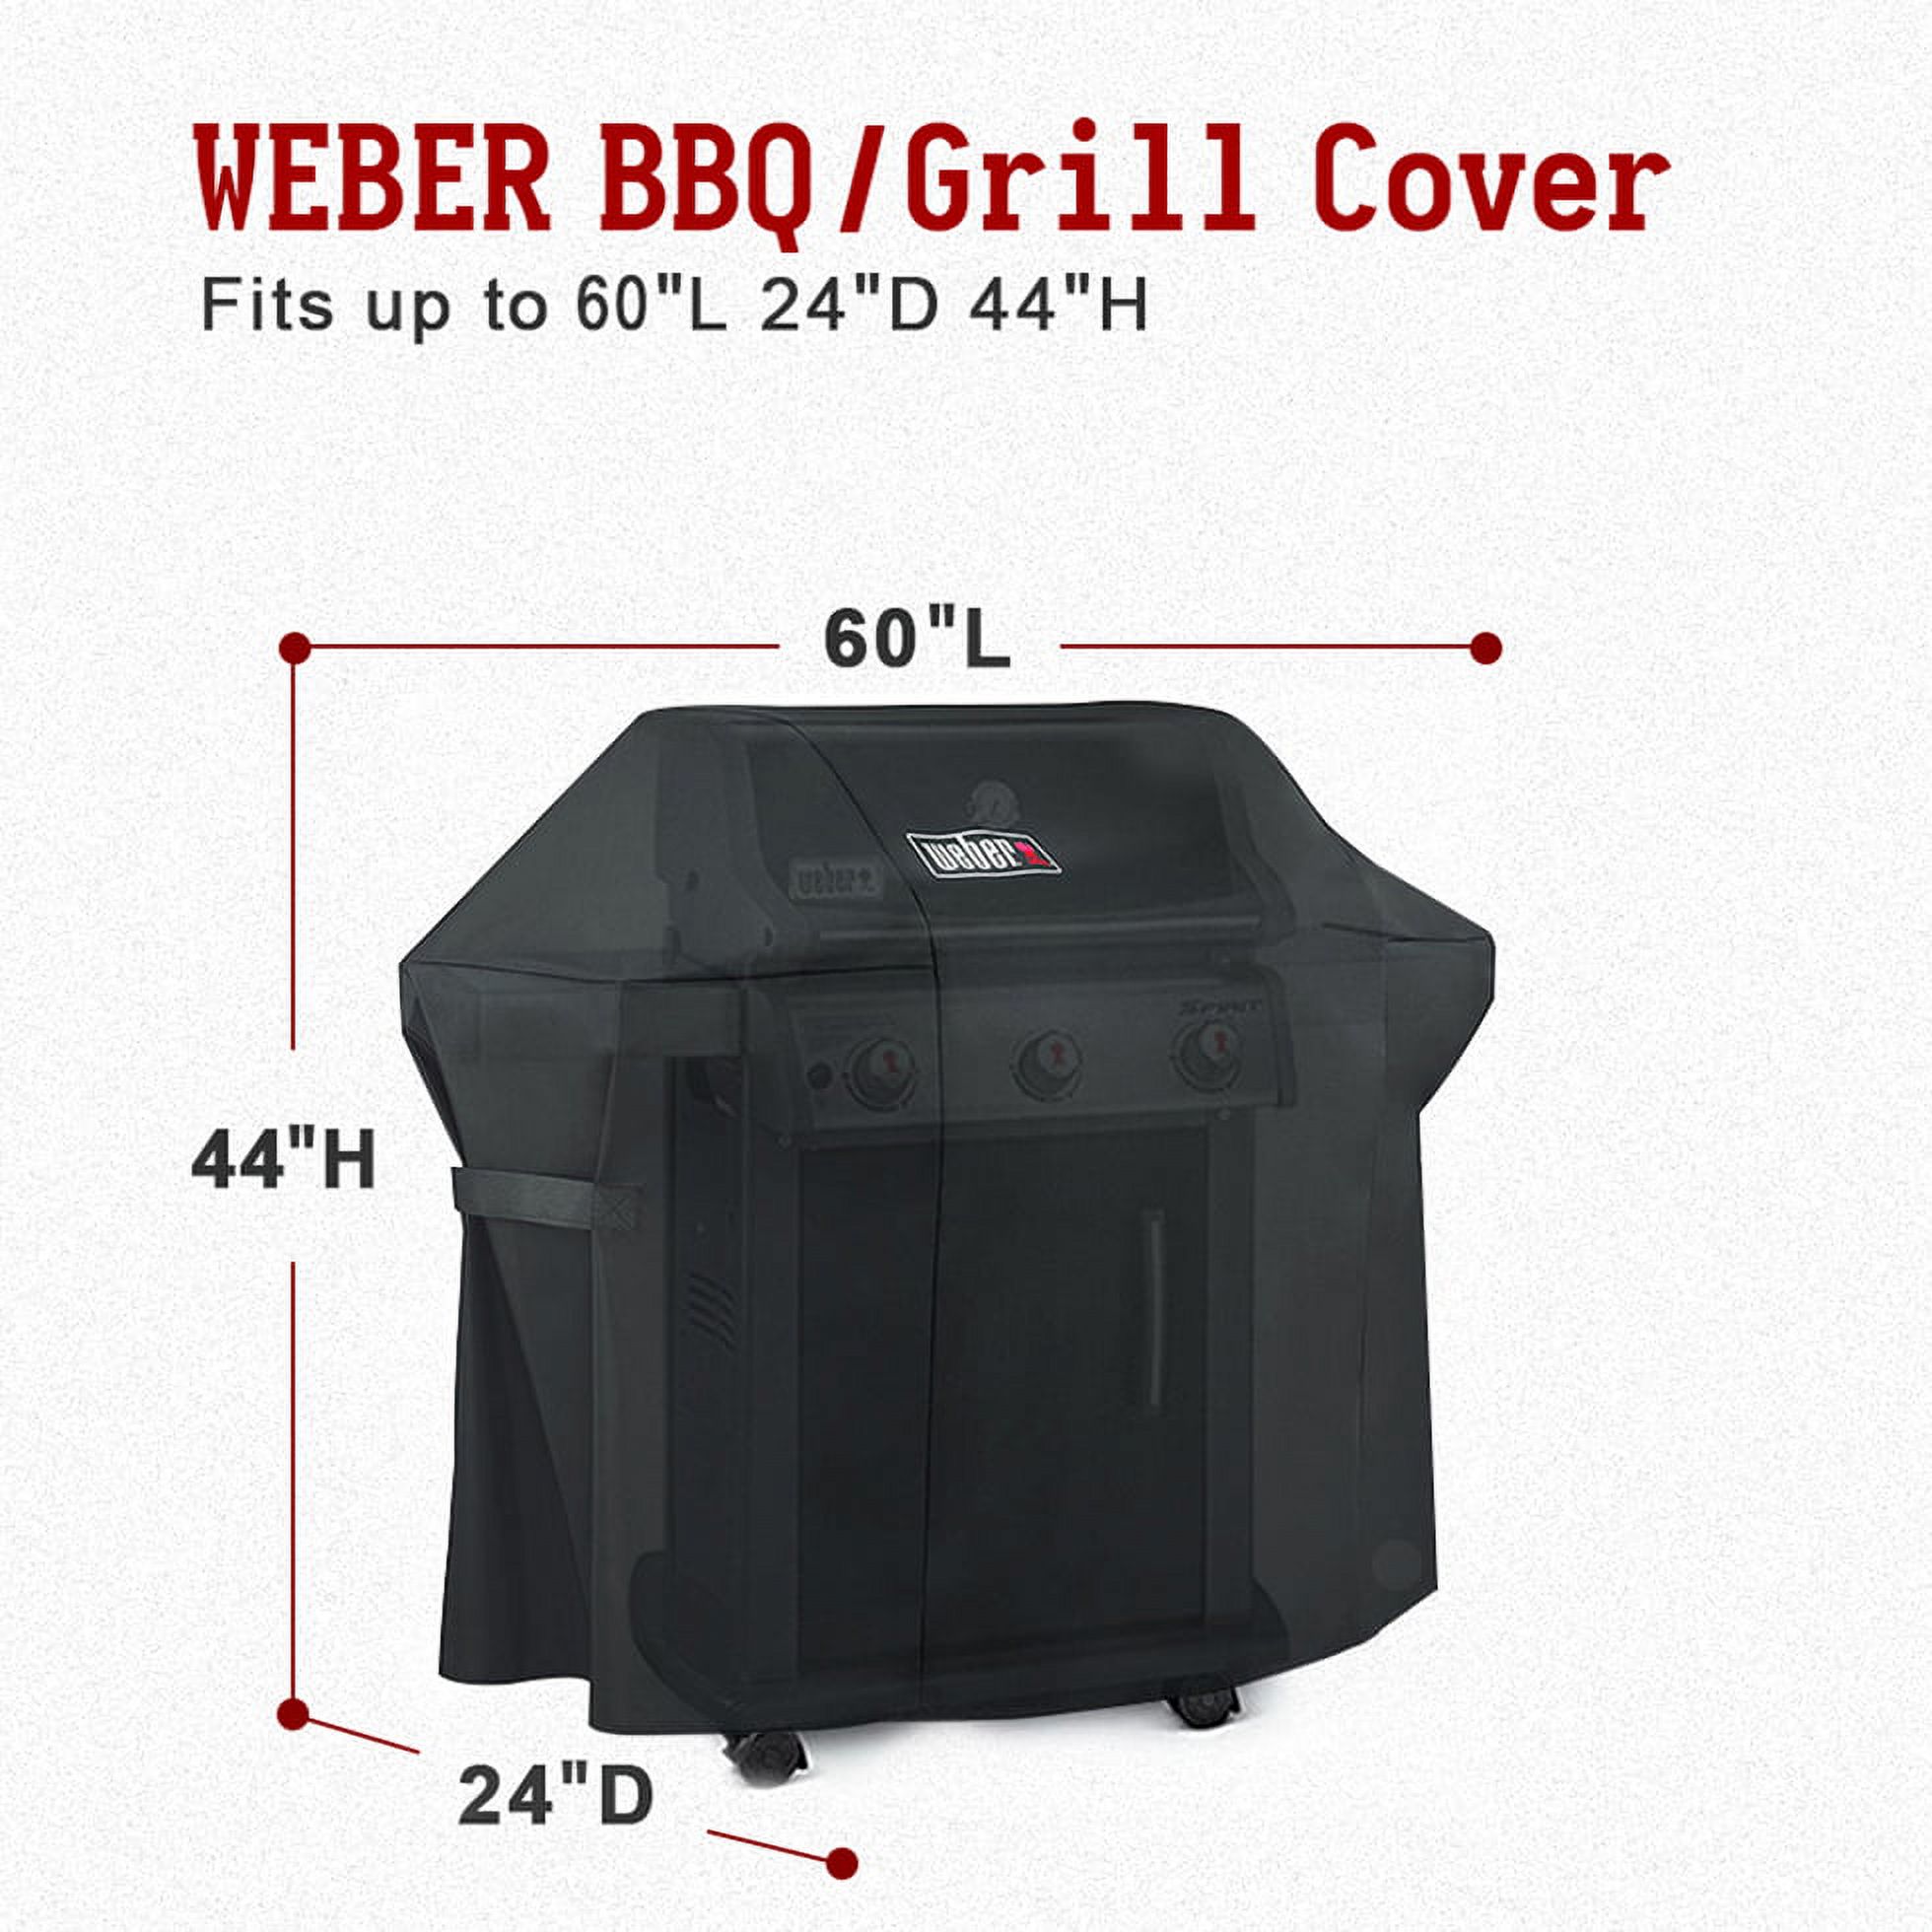 Weber 7107 Grill Cover for Weber Genesis 300 Series and Genesis II Gas Grills (60 X 24 X 44 inches) - image 2 of 5